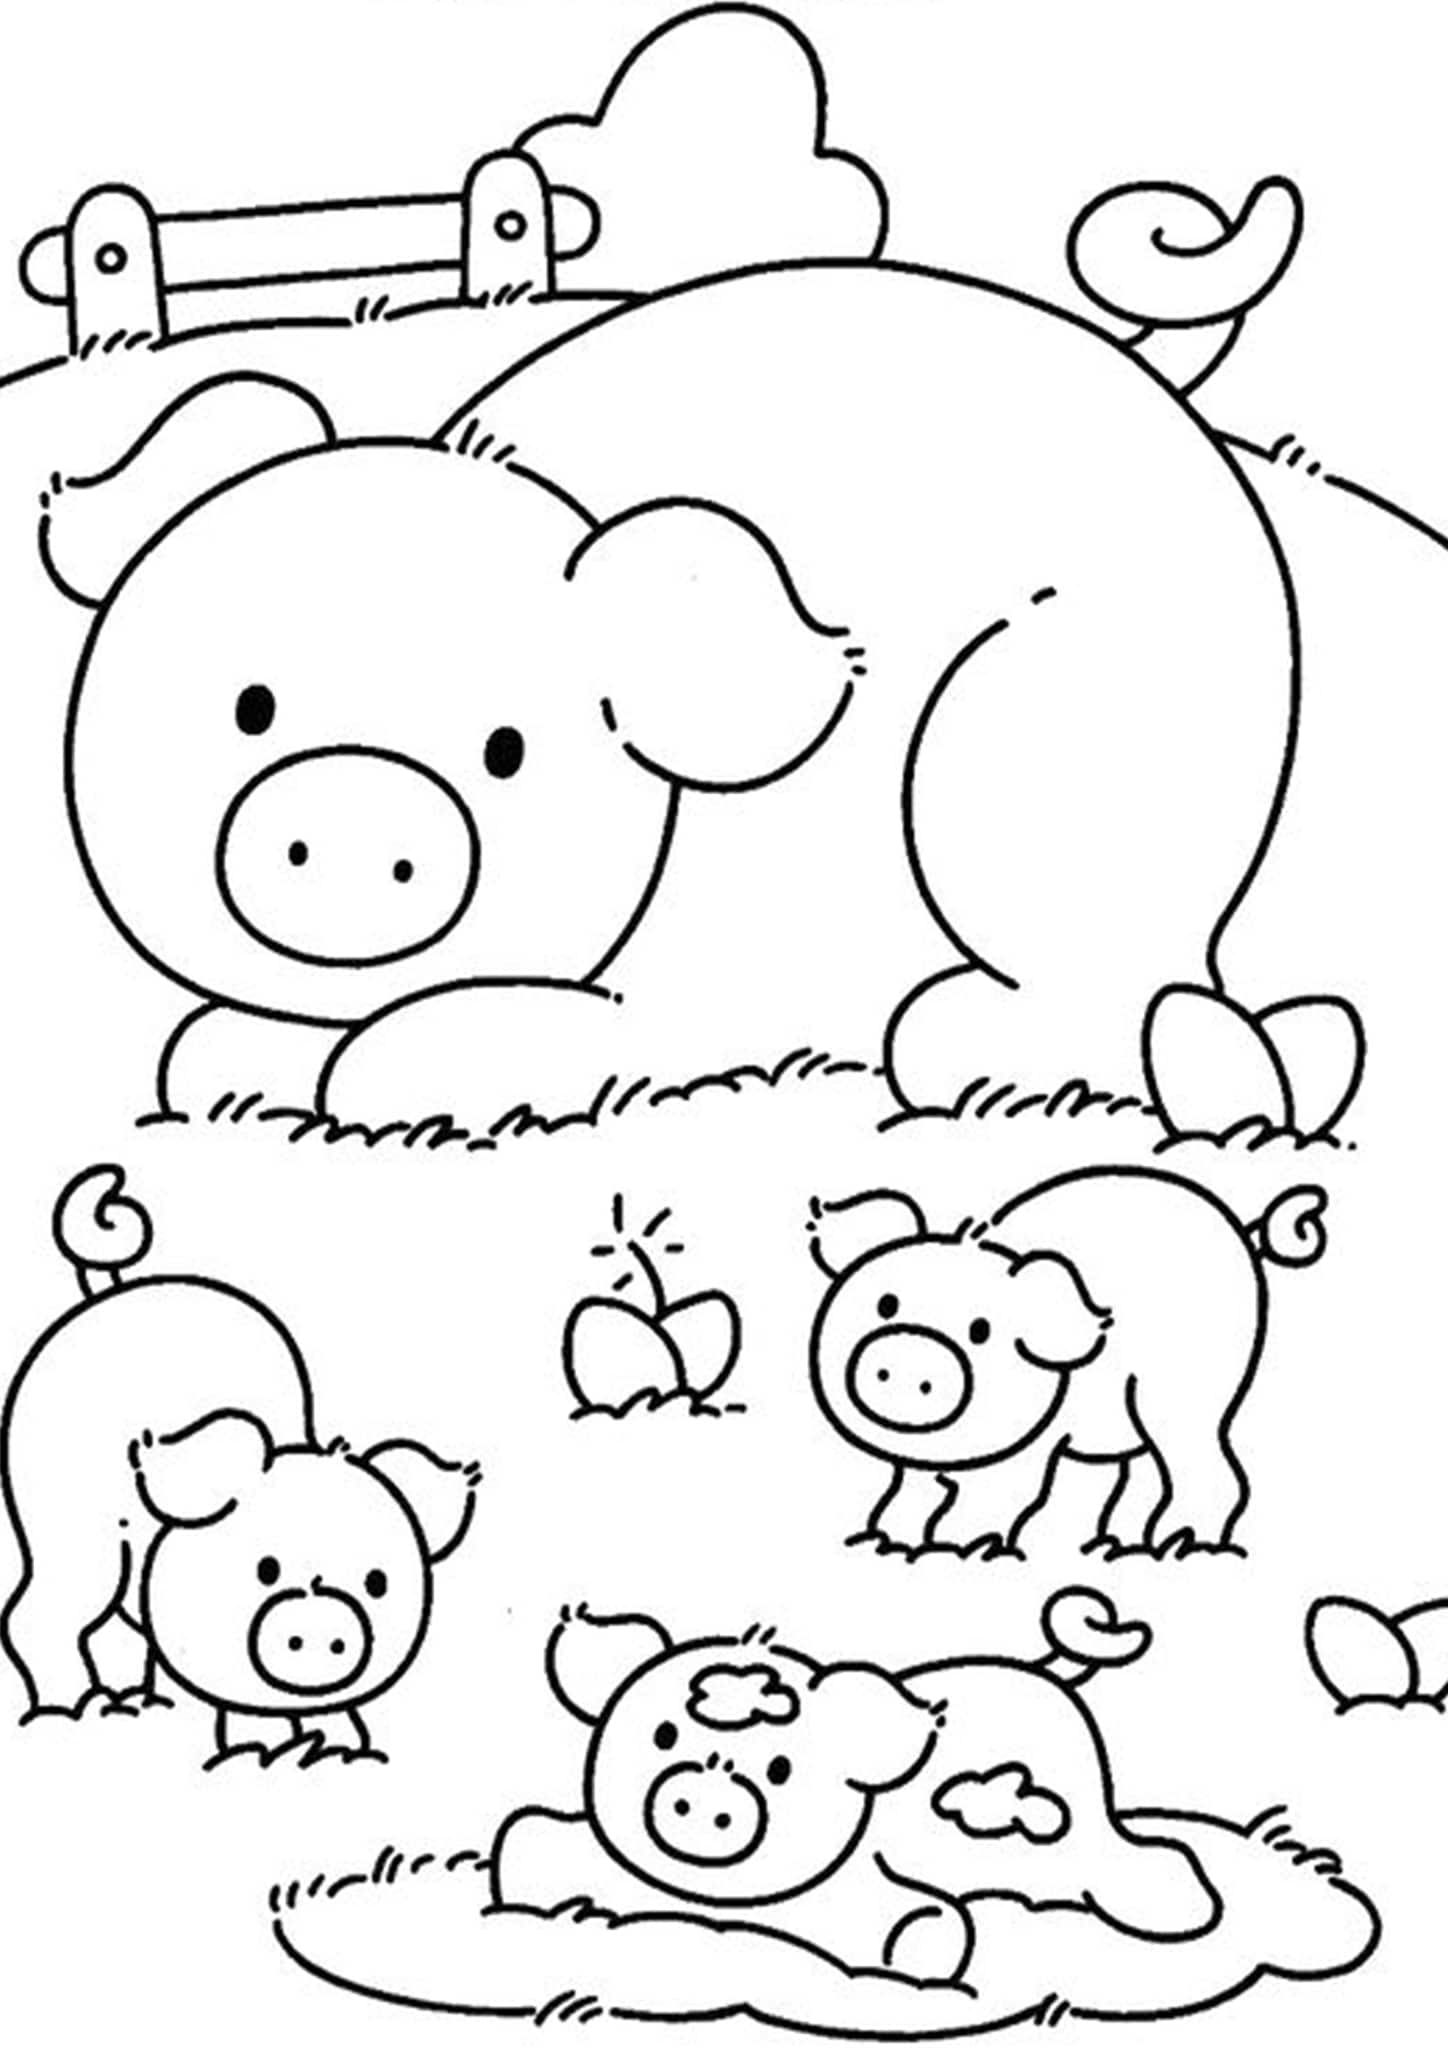 Free easy to print pig coloring pages farm animal coloring pages farm coloring pages animal coloring pages